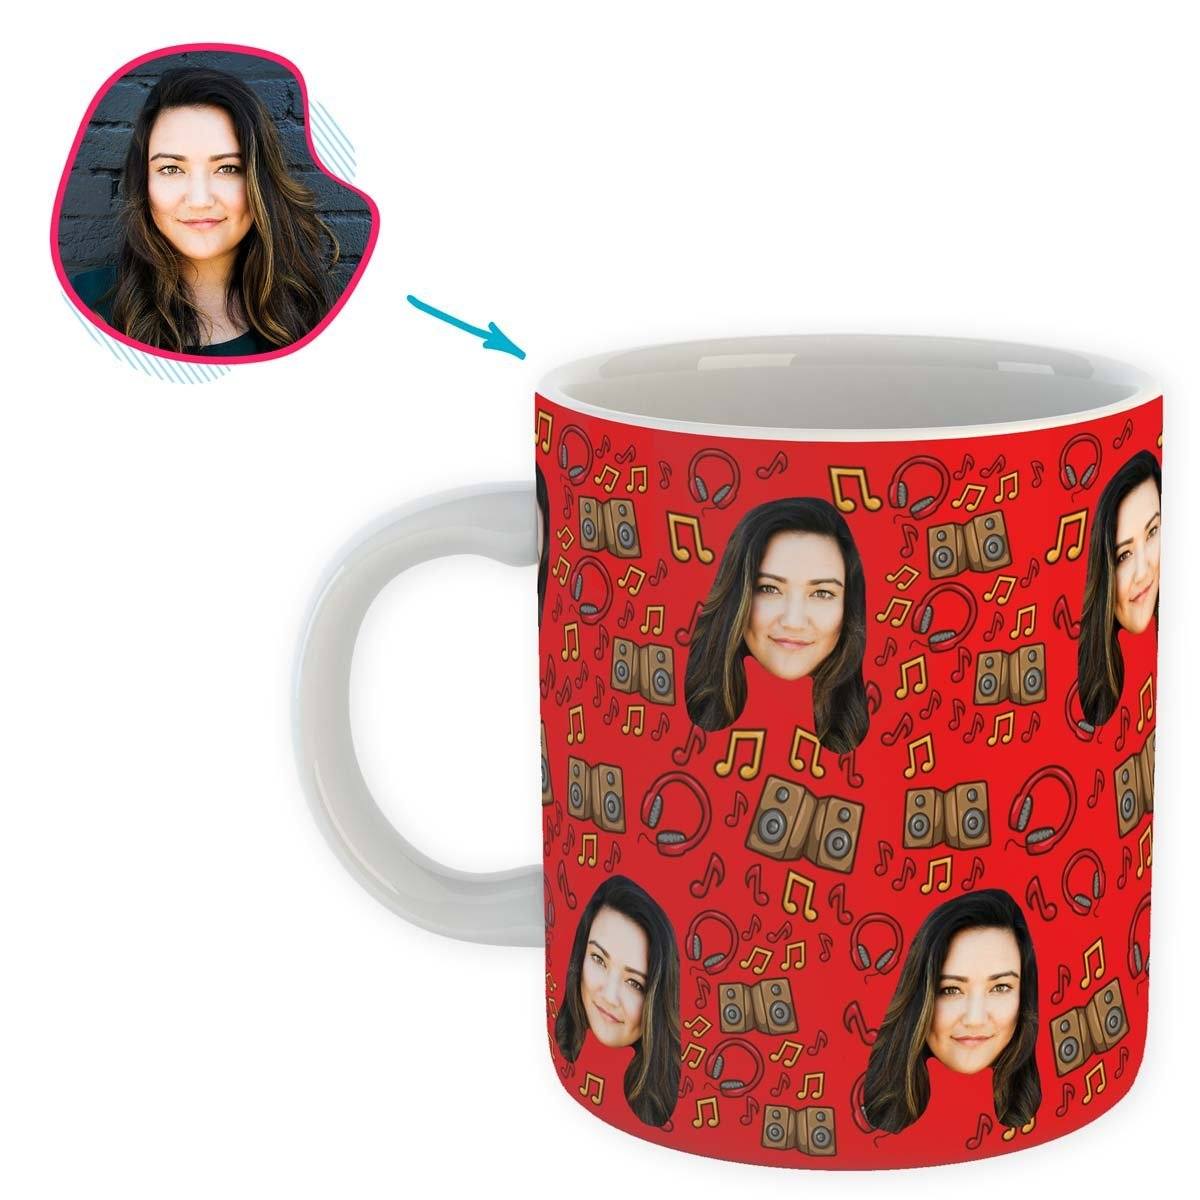 red Music mug personalized with photo of face printed on it